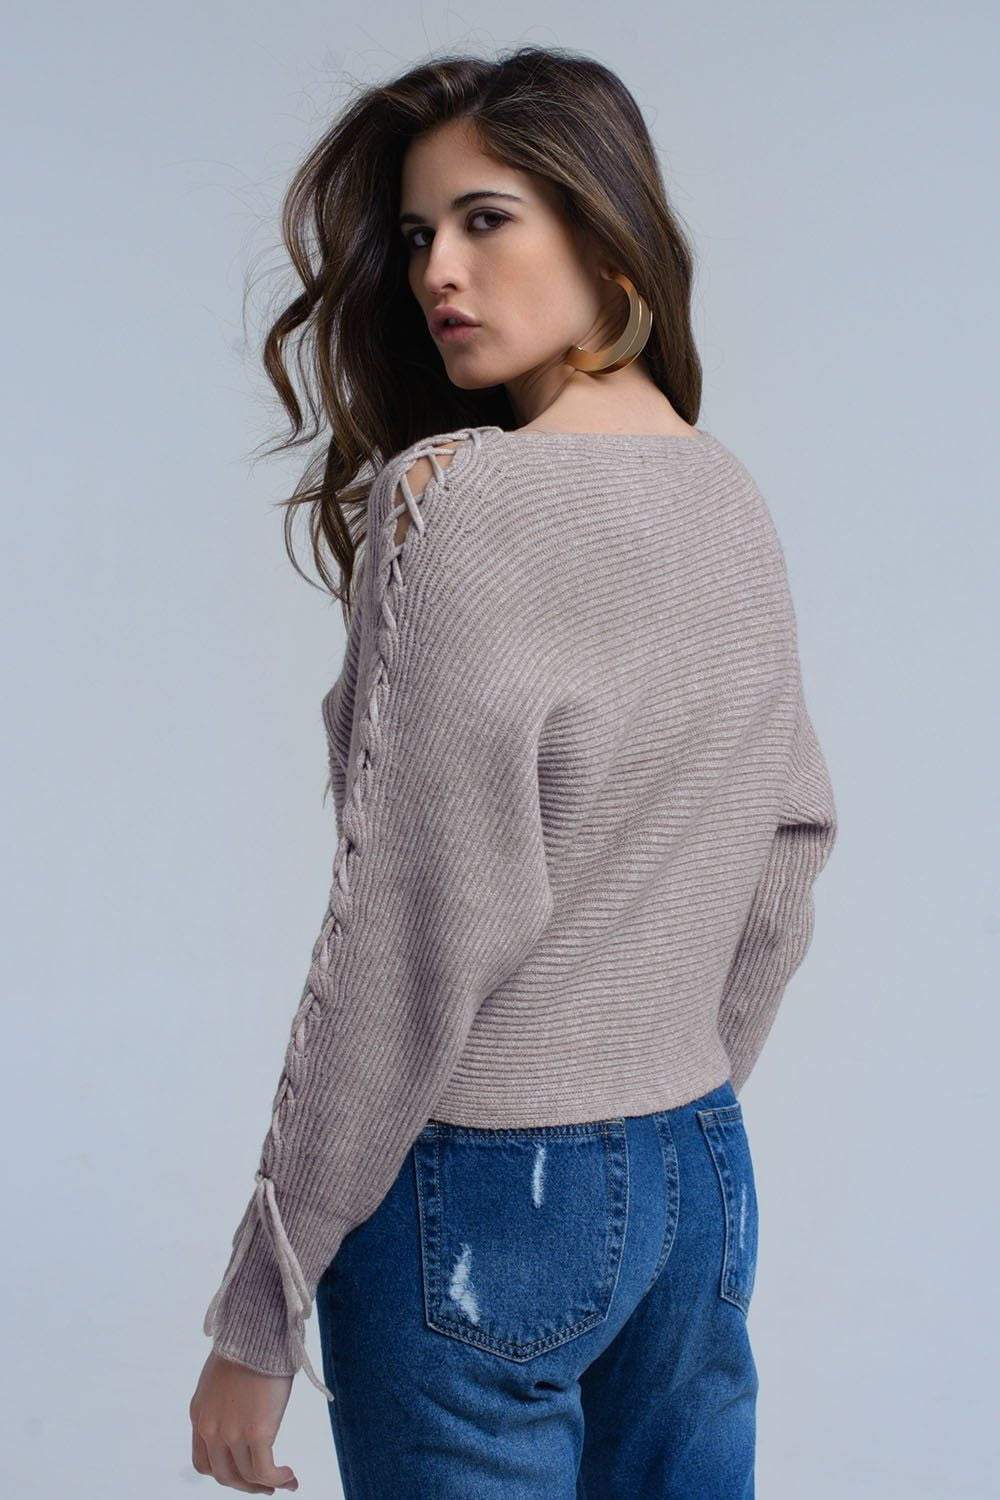 Beige crop sweater with tie ribbons